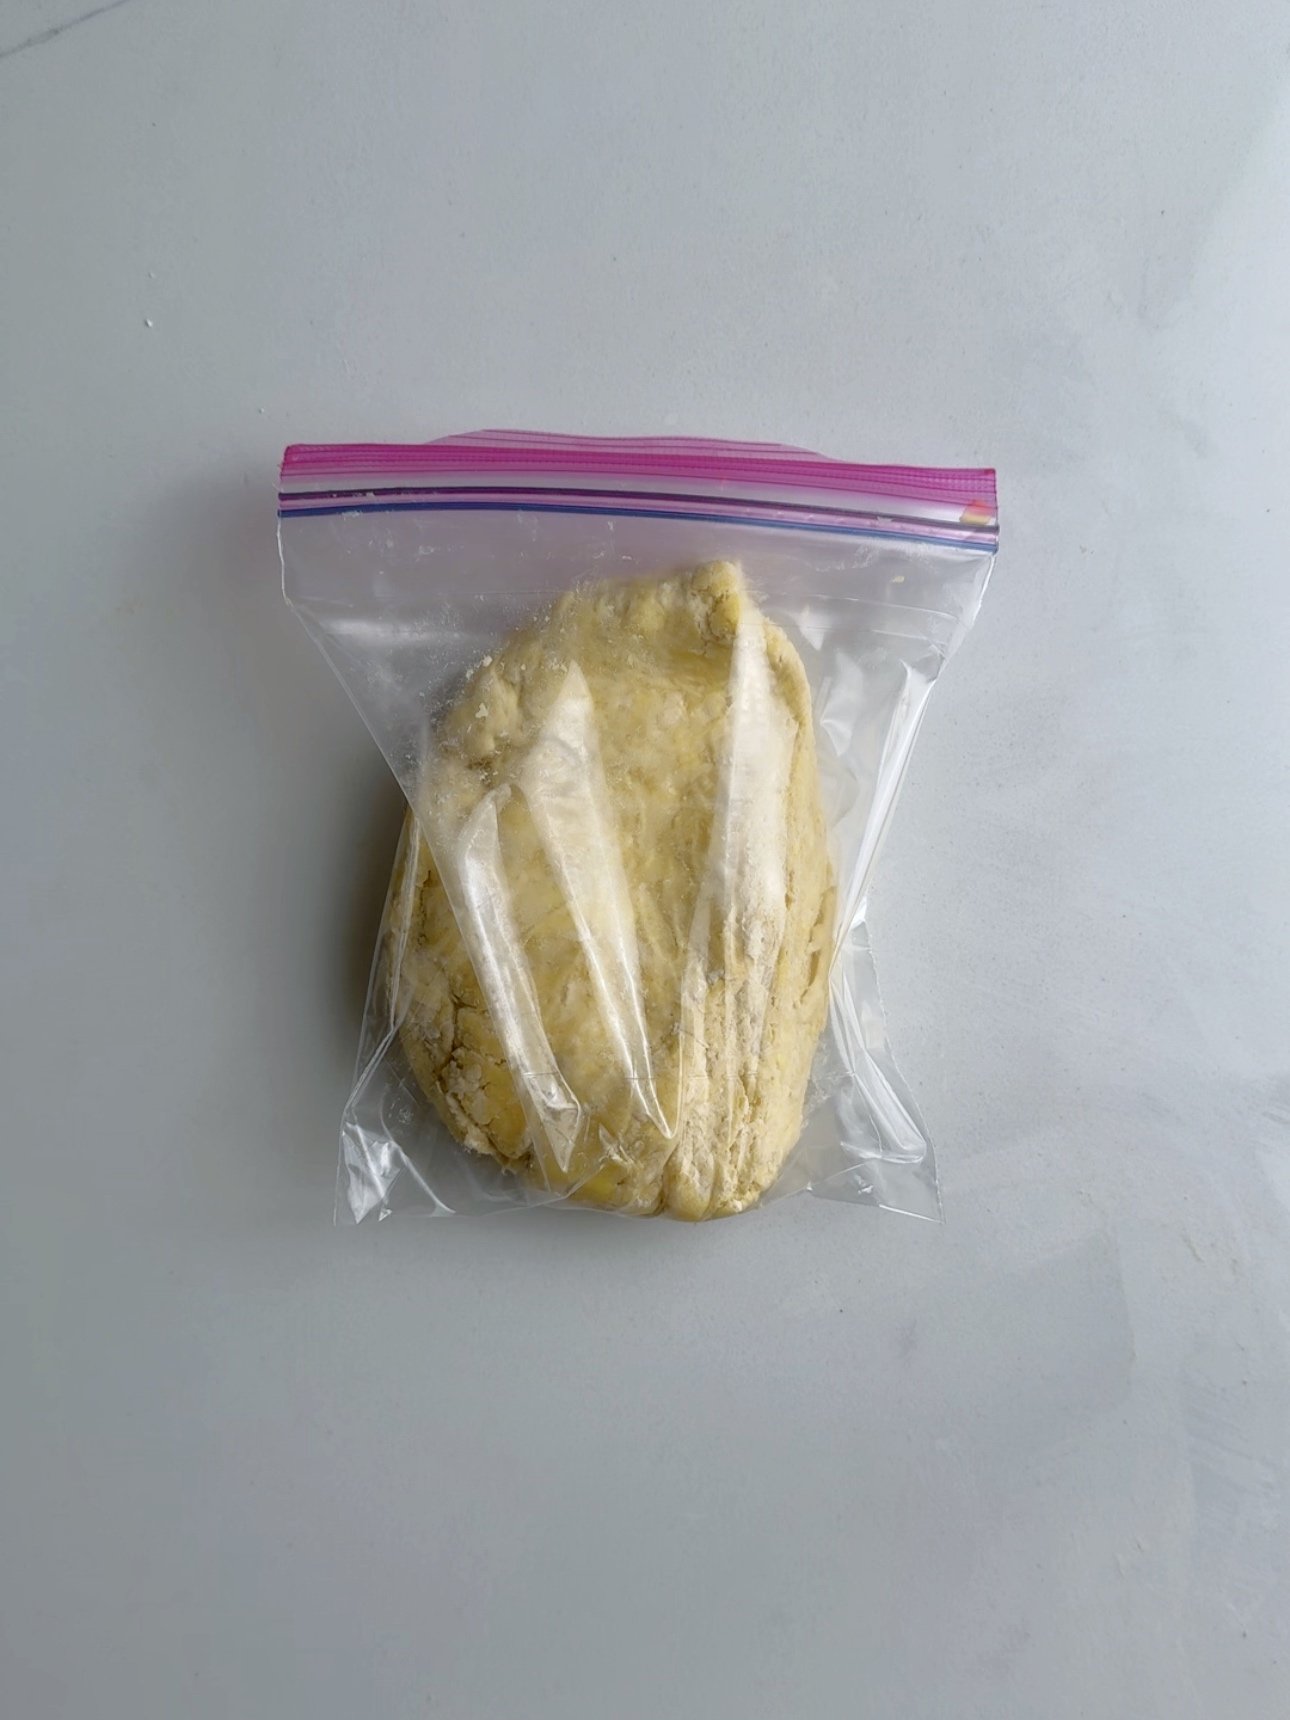 Pastry dough in a ziptop plastic bag on a white surface